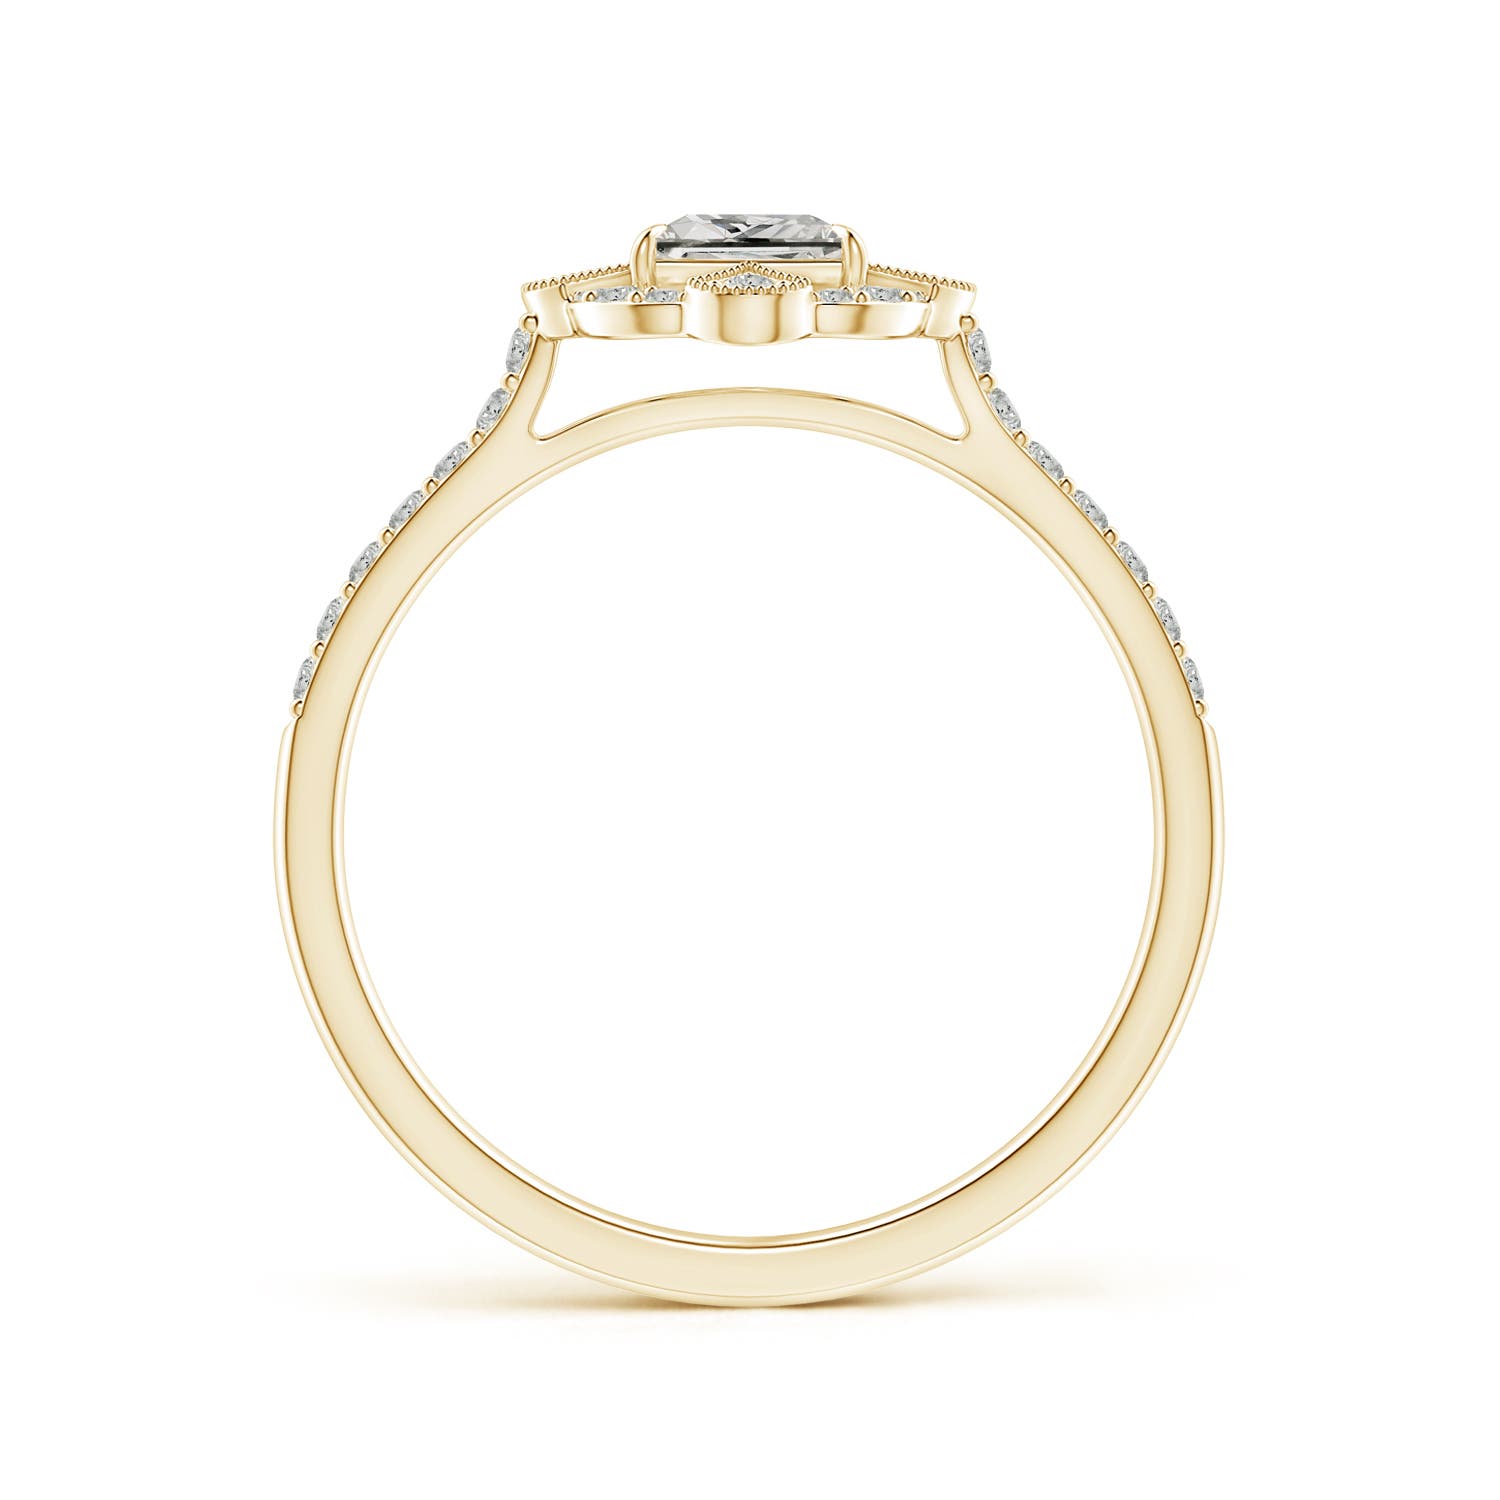 K, I3 / 0.74 CT / 14 KT Yellow Gold